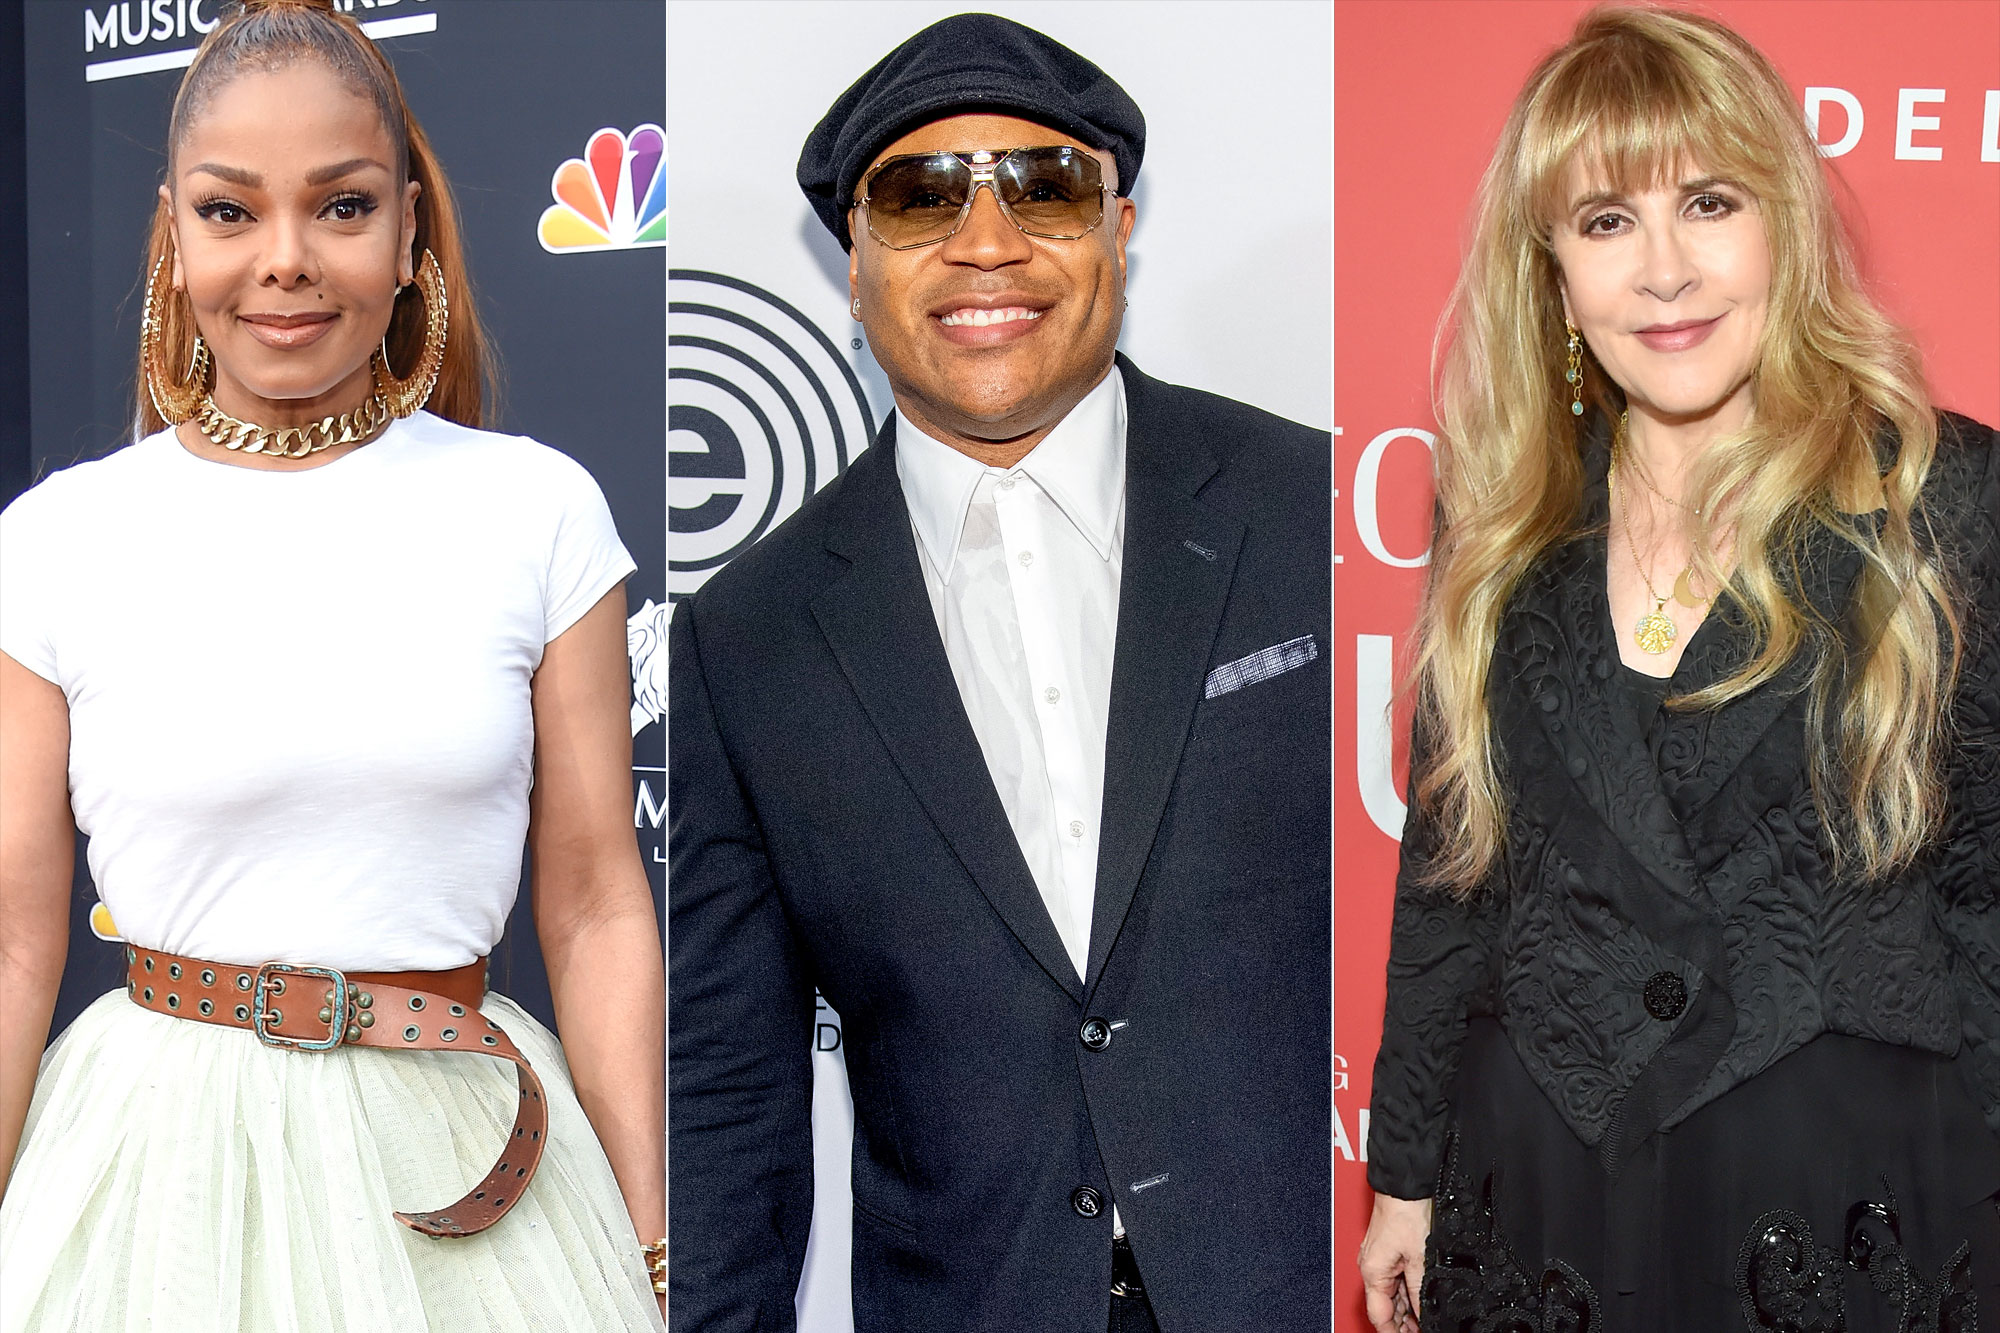 Janet Jackson, LL Cool J among 2019 class of Rock and Roll Hall of Fame nominees